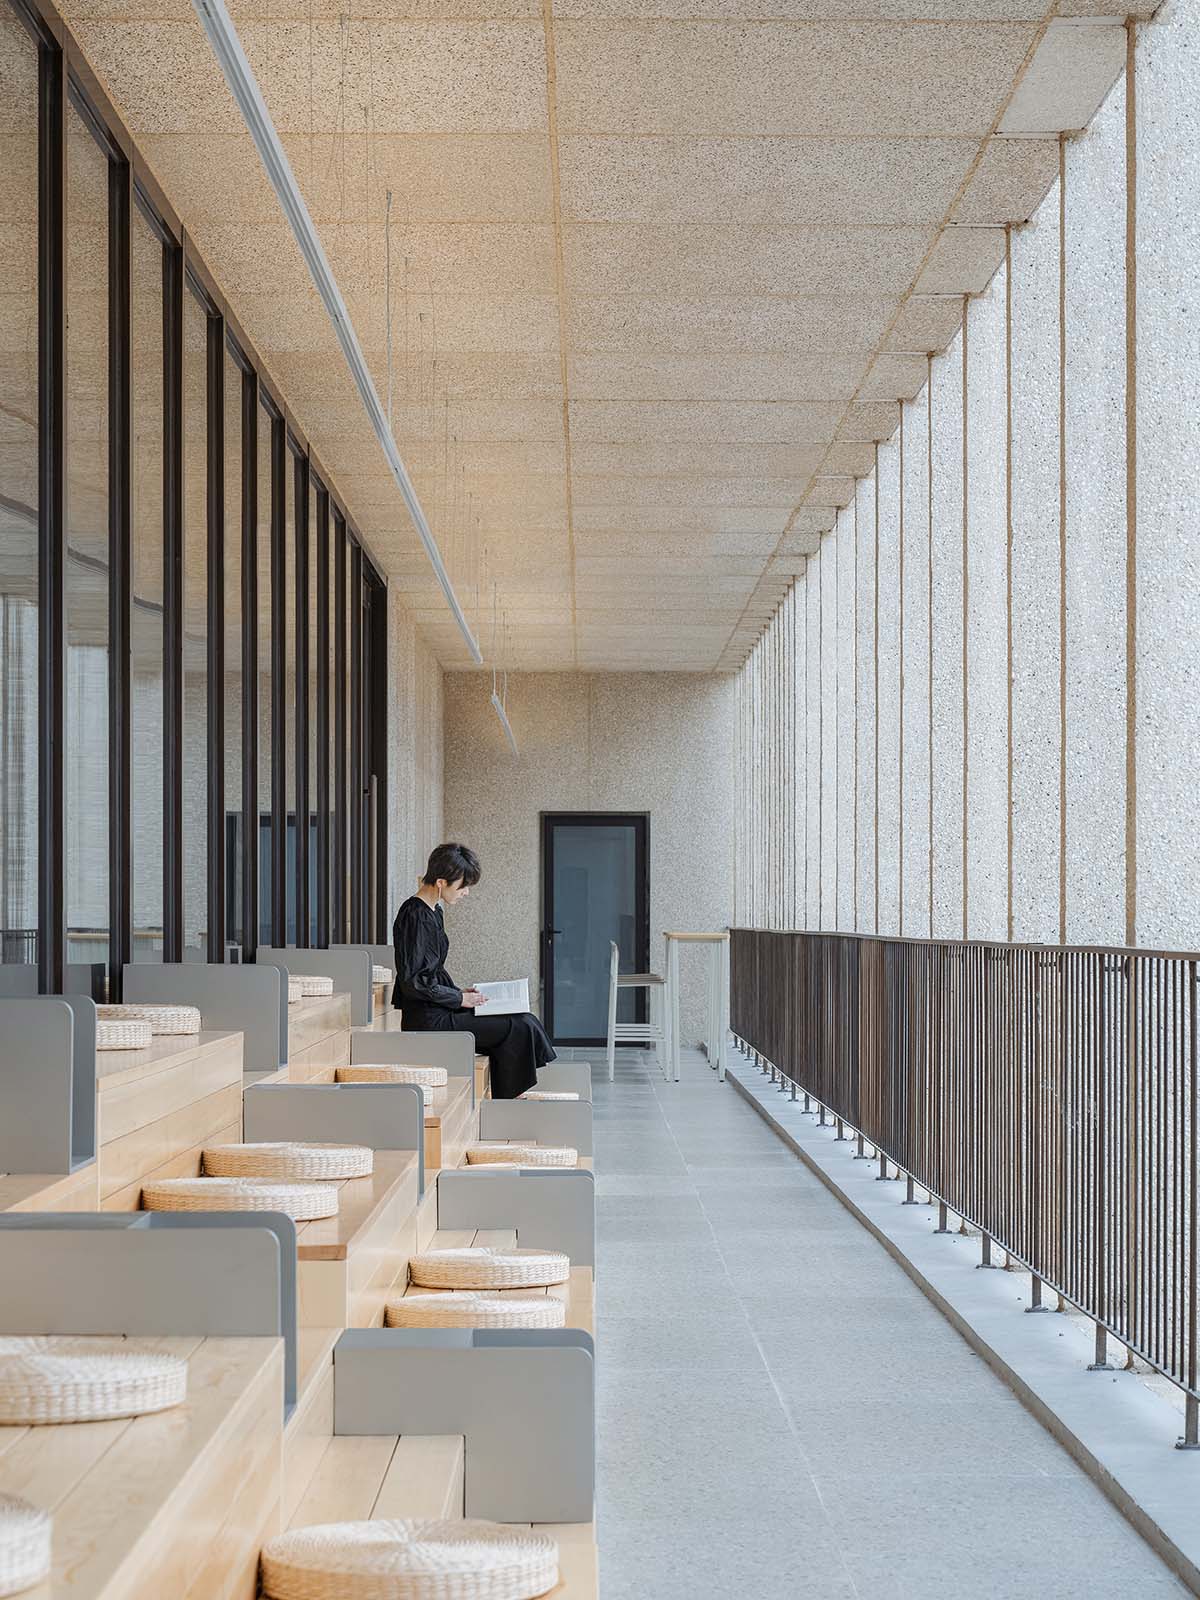 Zikawei Library features a spacious atrium with deep alcoves inspired by Chinese trousseau box